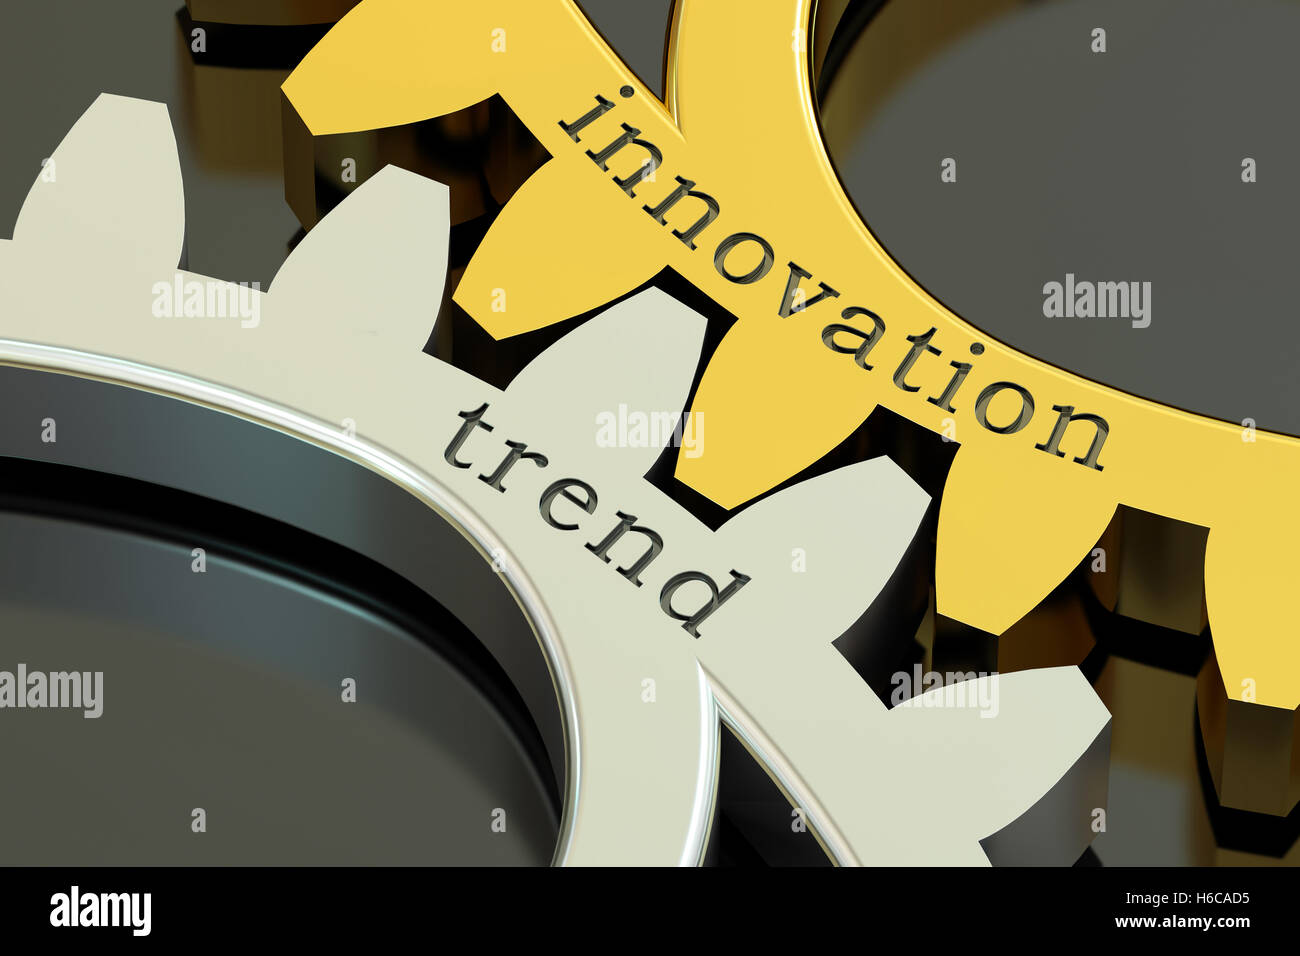 Innovation Trend concept, 3D rendering Stock Photo